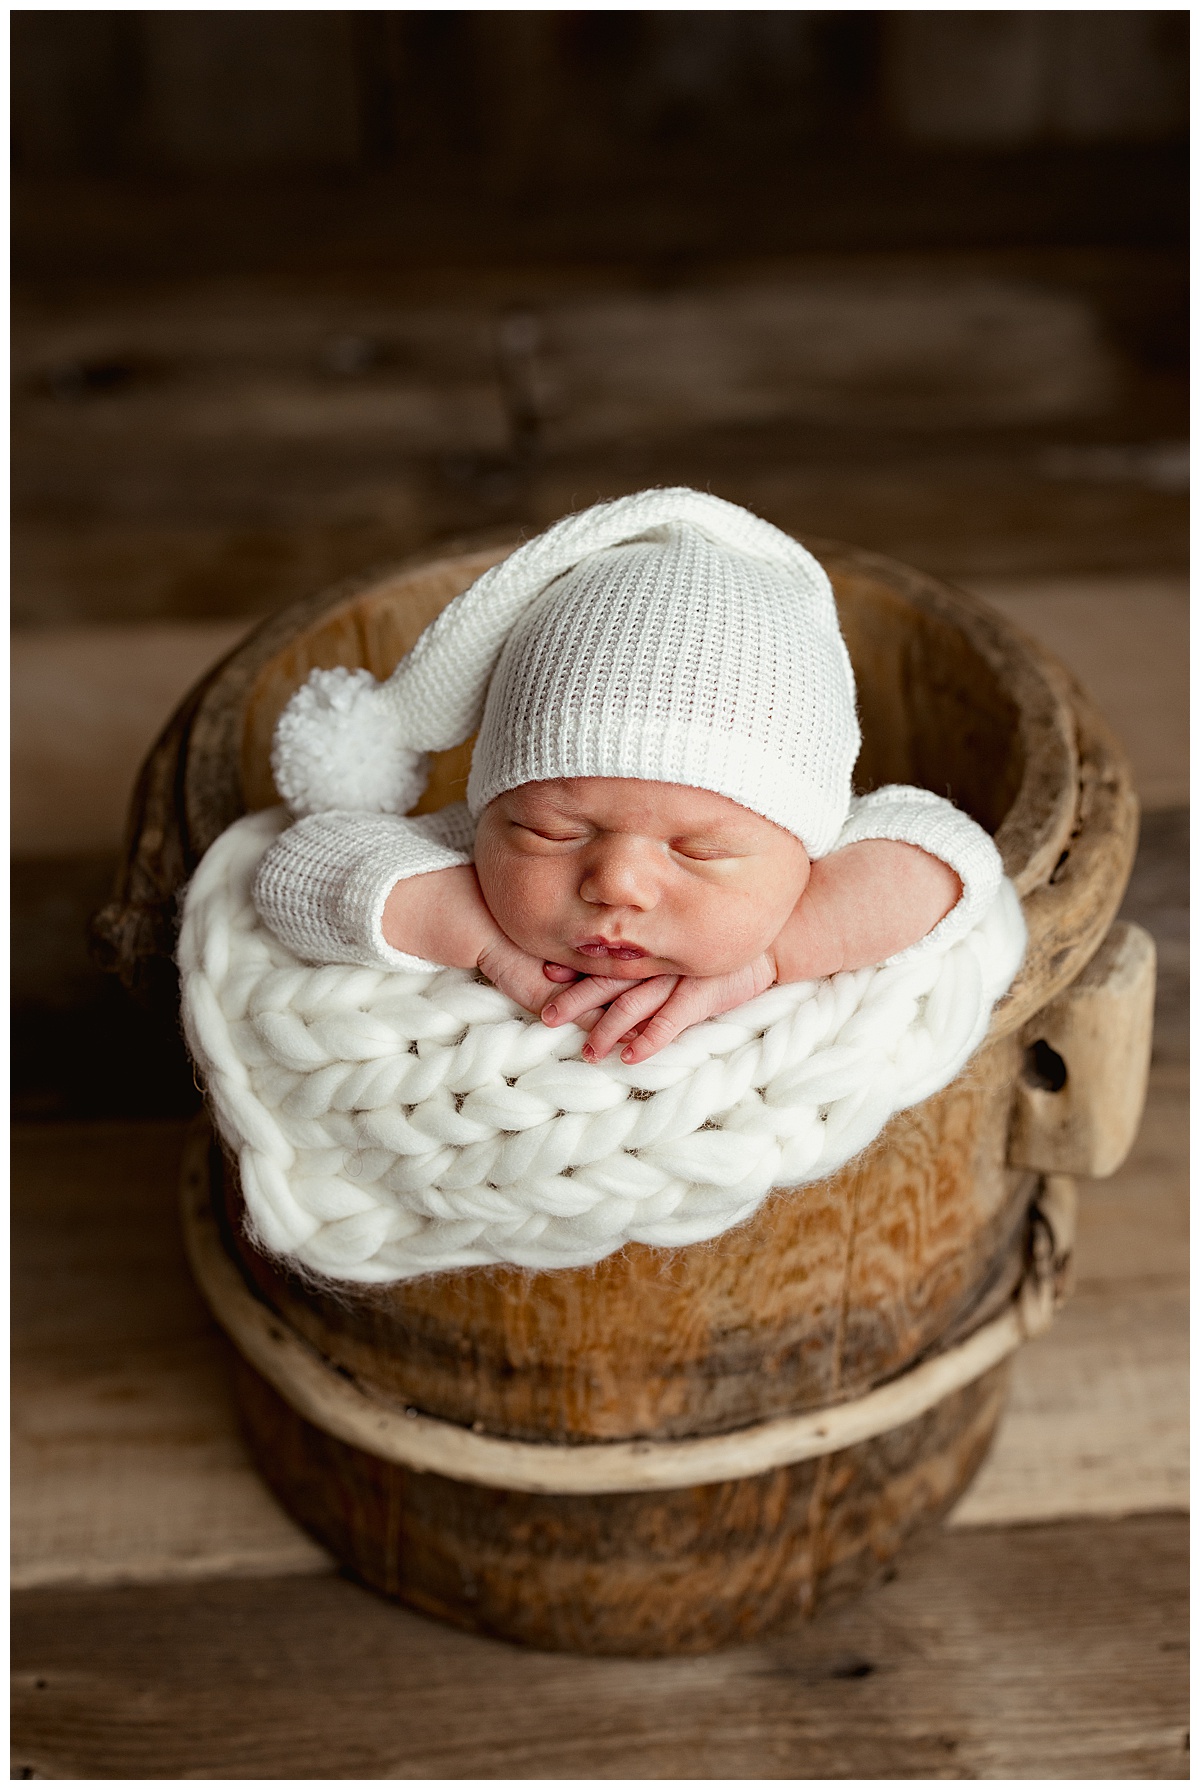 Infant sits on wooden basket for Intimate Studio Newborn Session